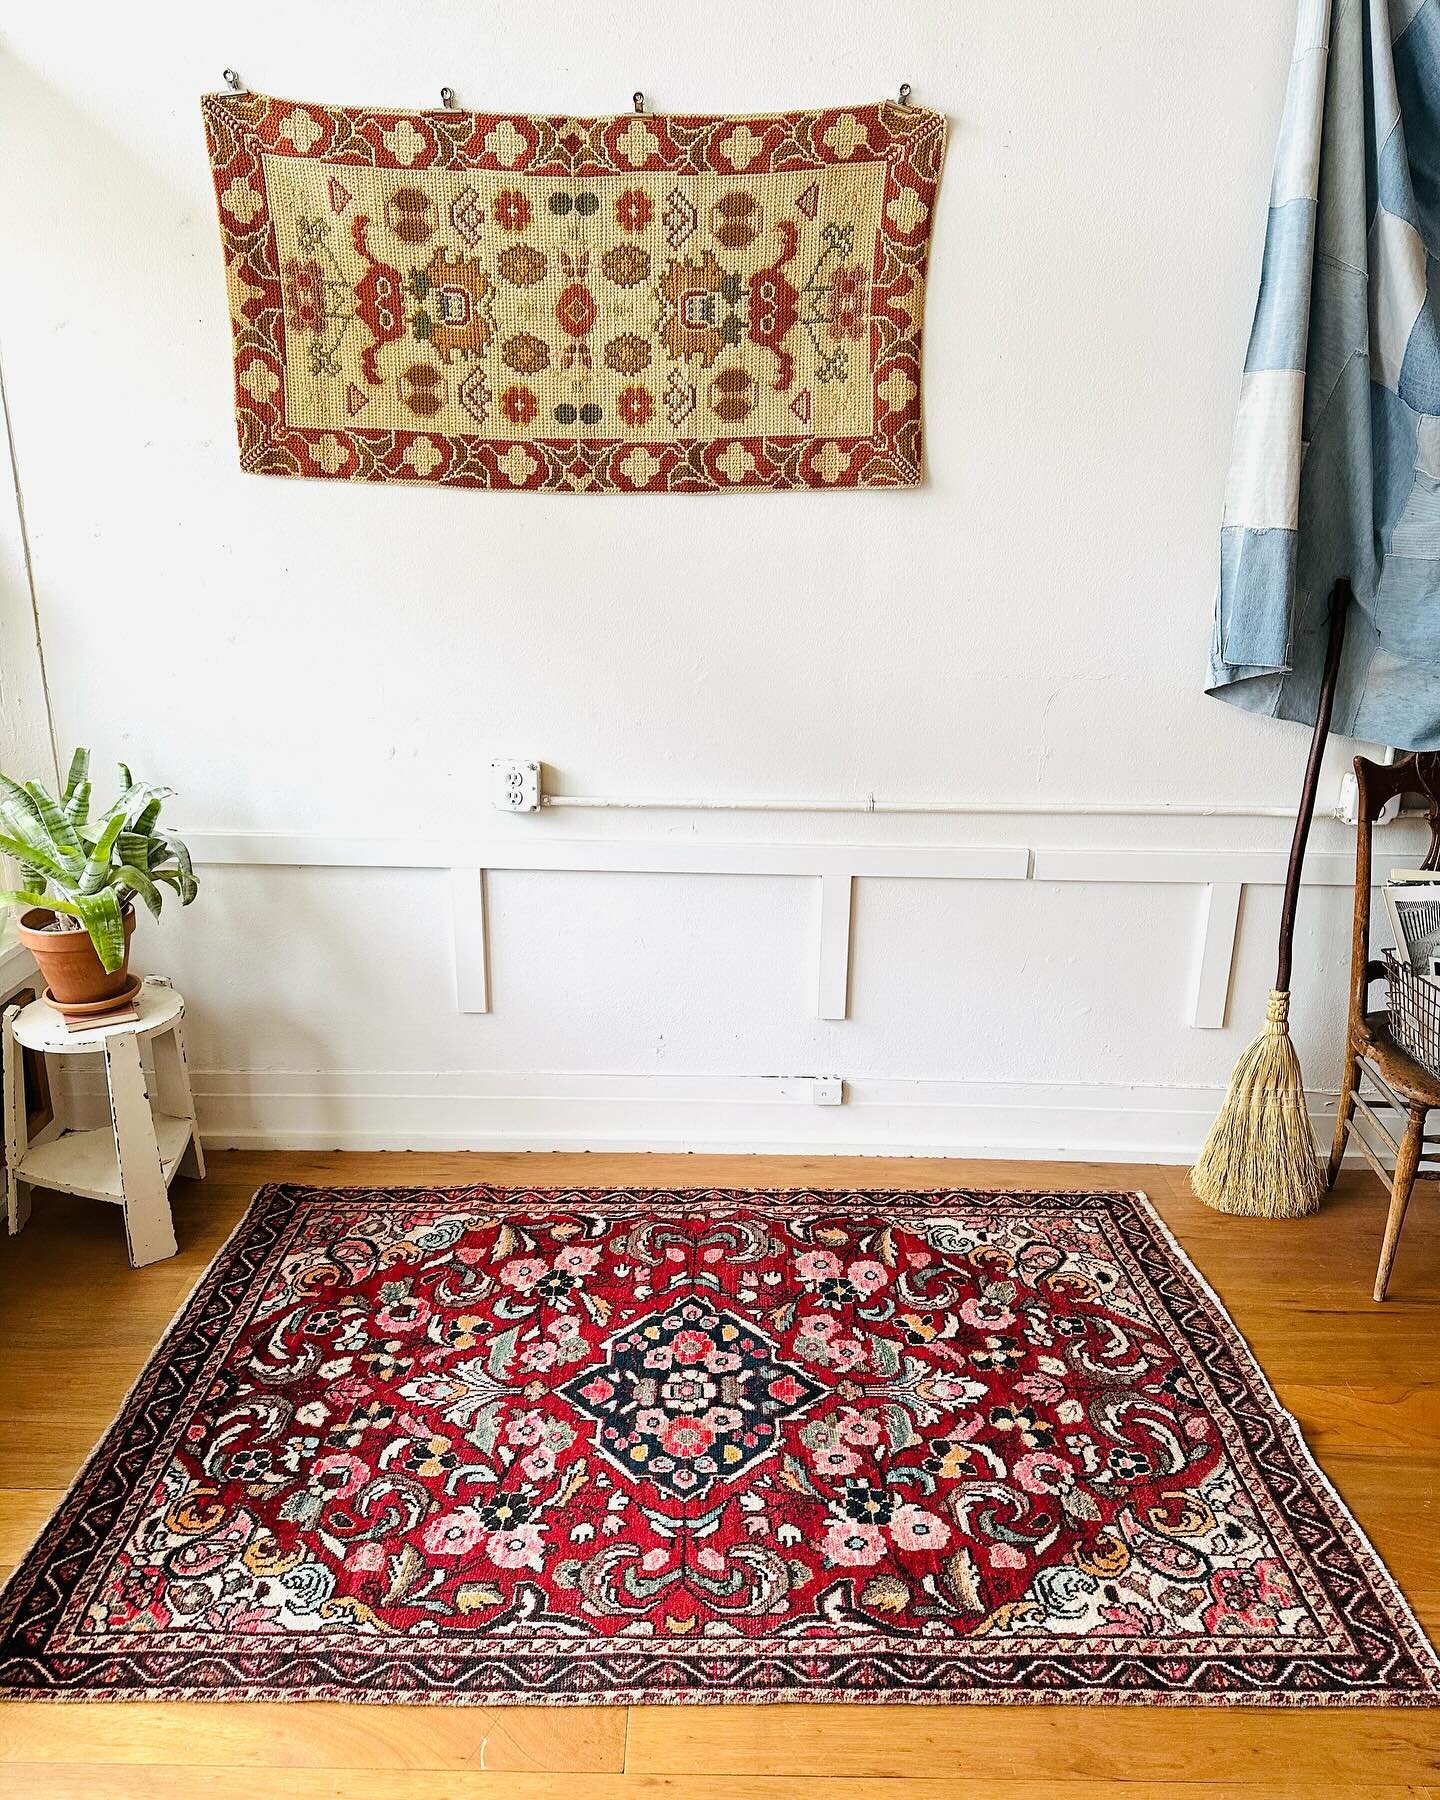 Lots of gorgeous rugs landed in the webshop this week. Scroll thru to see what new (old) rugs we have for ya! 🧡